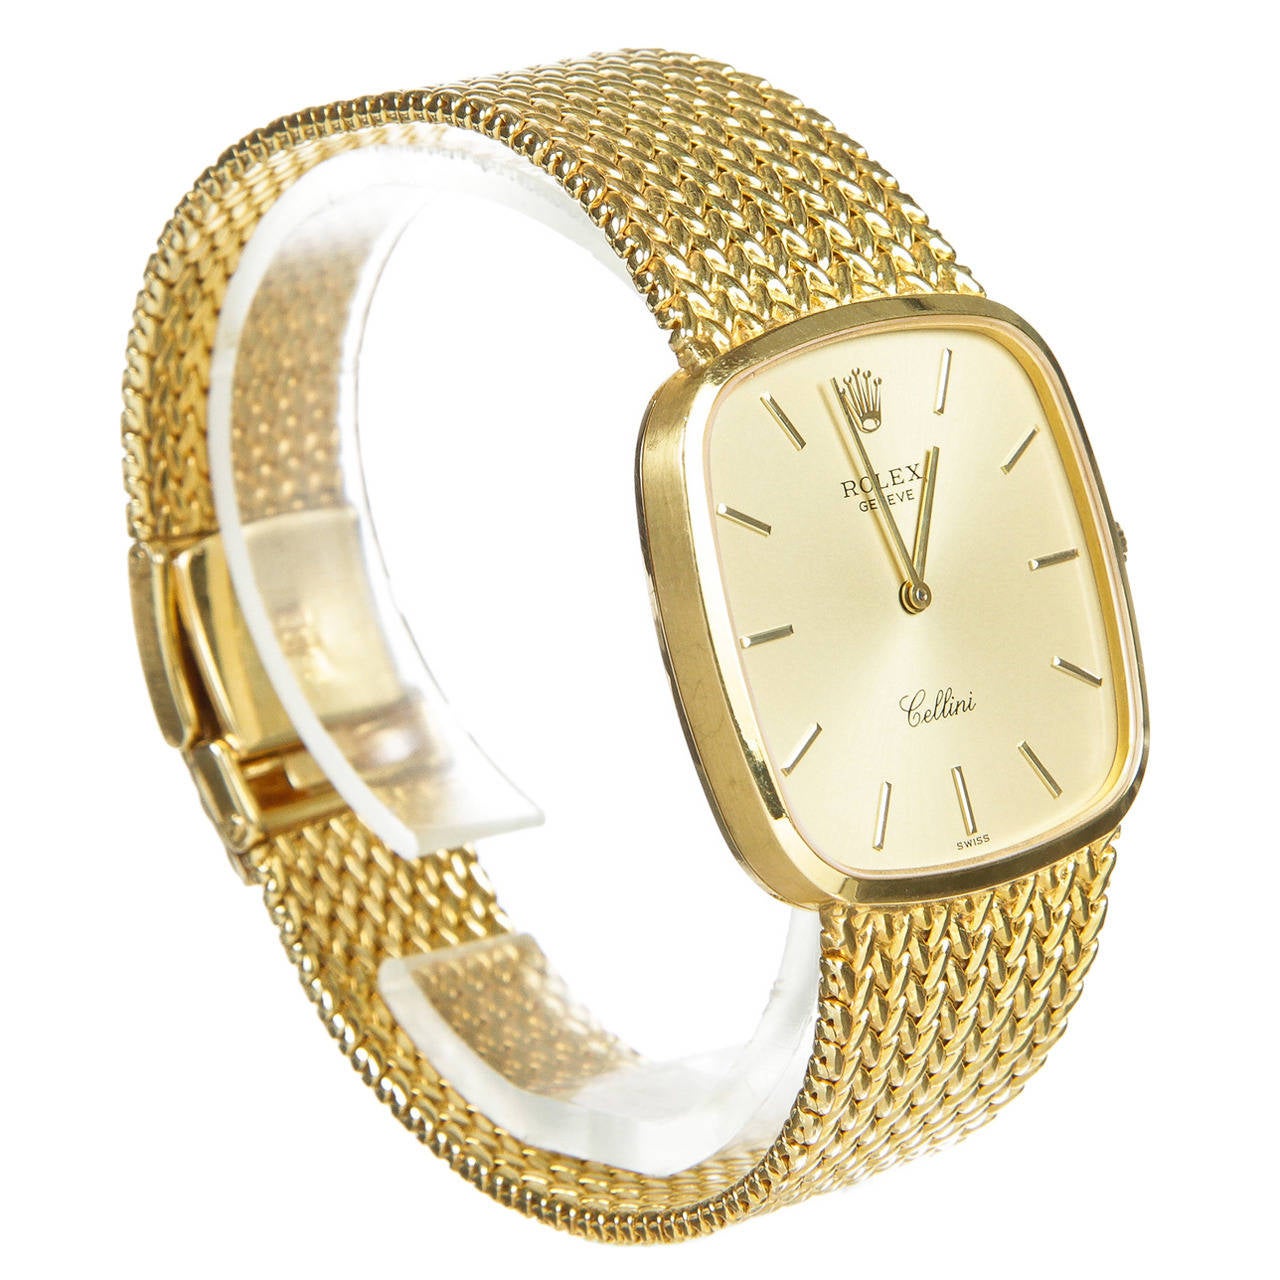 14k Rolex lady's Cellini bracelet watch with a beautiful champagne dial accented with gilt hour markers. The bracelet is yellow gold.